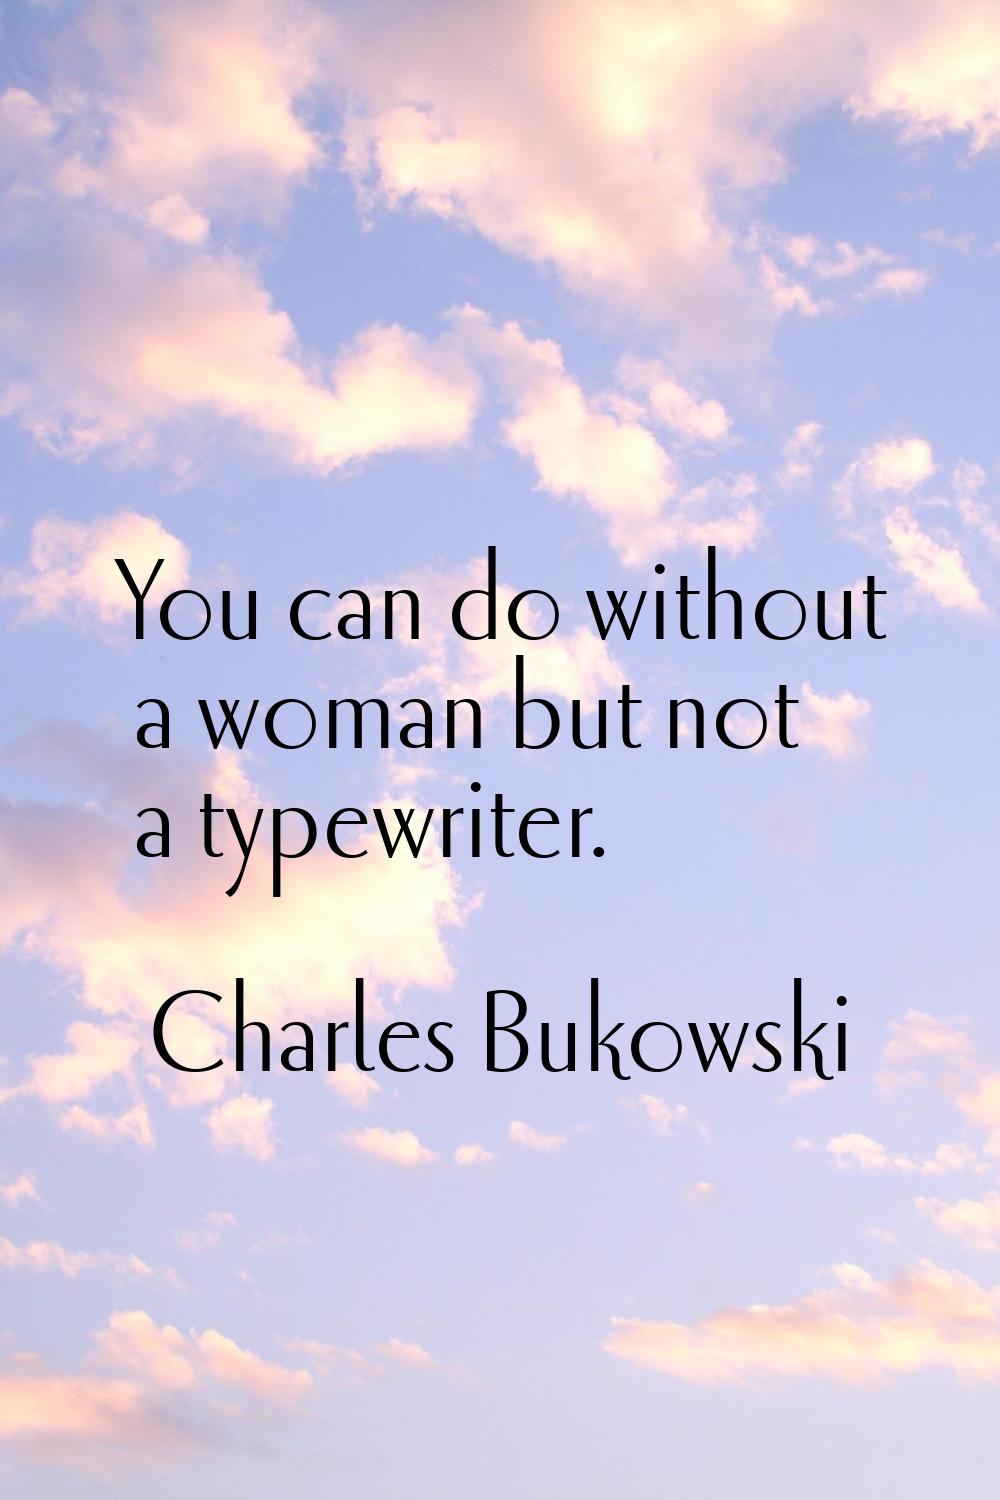 You can do without a woman but not a typewriter.